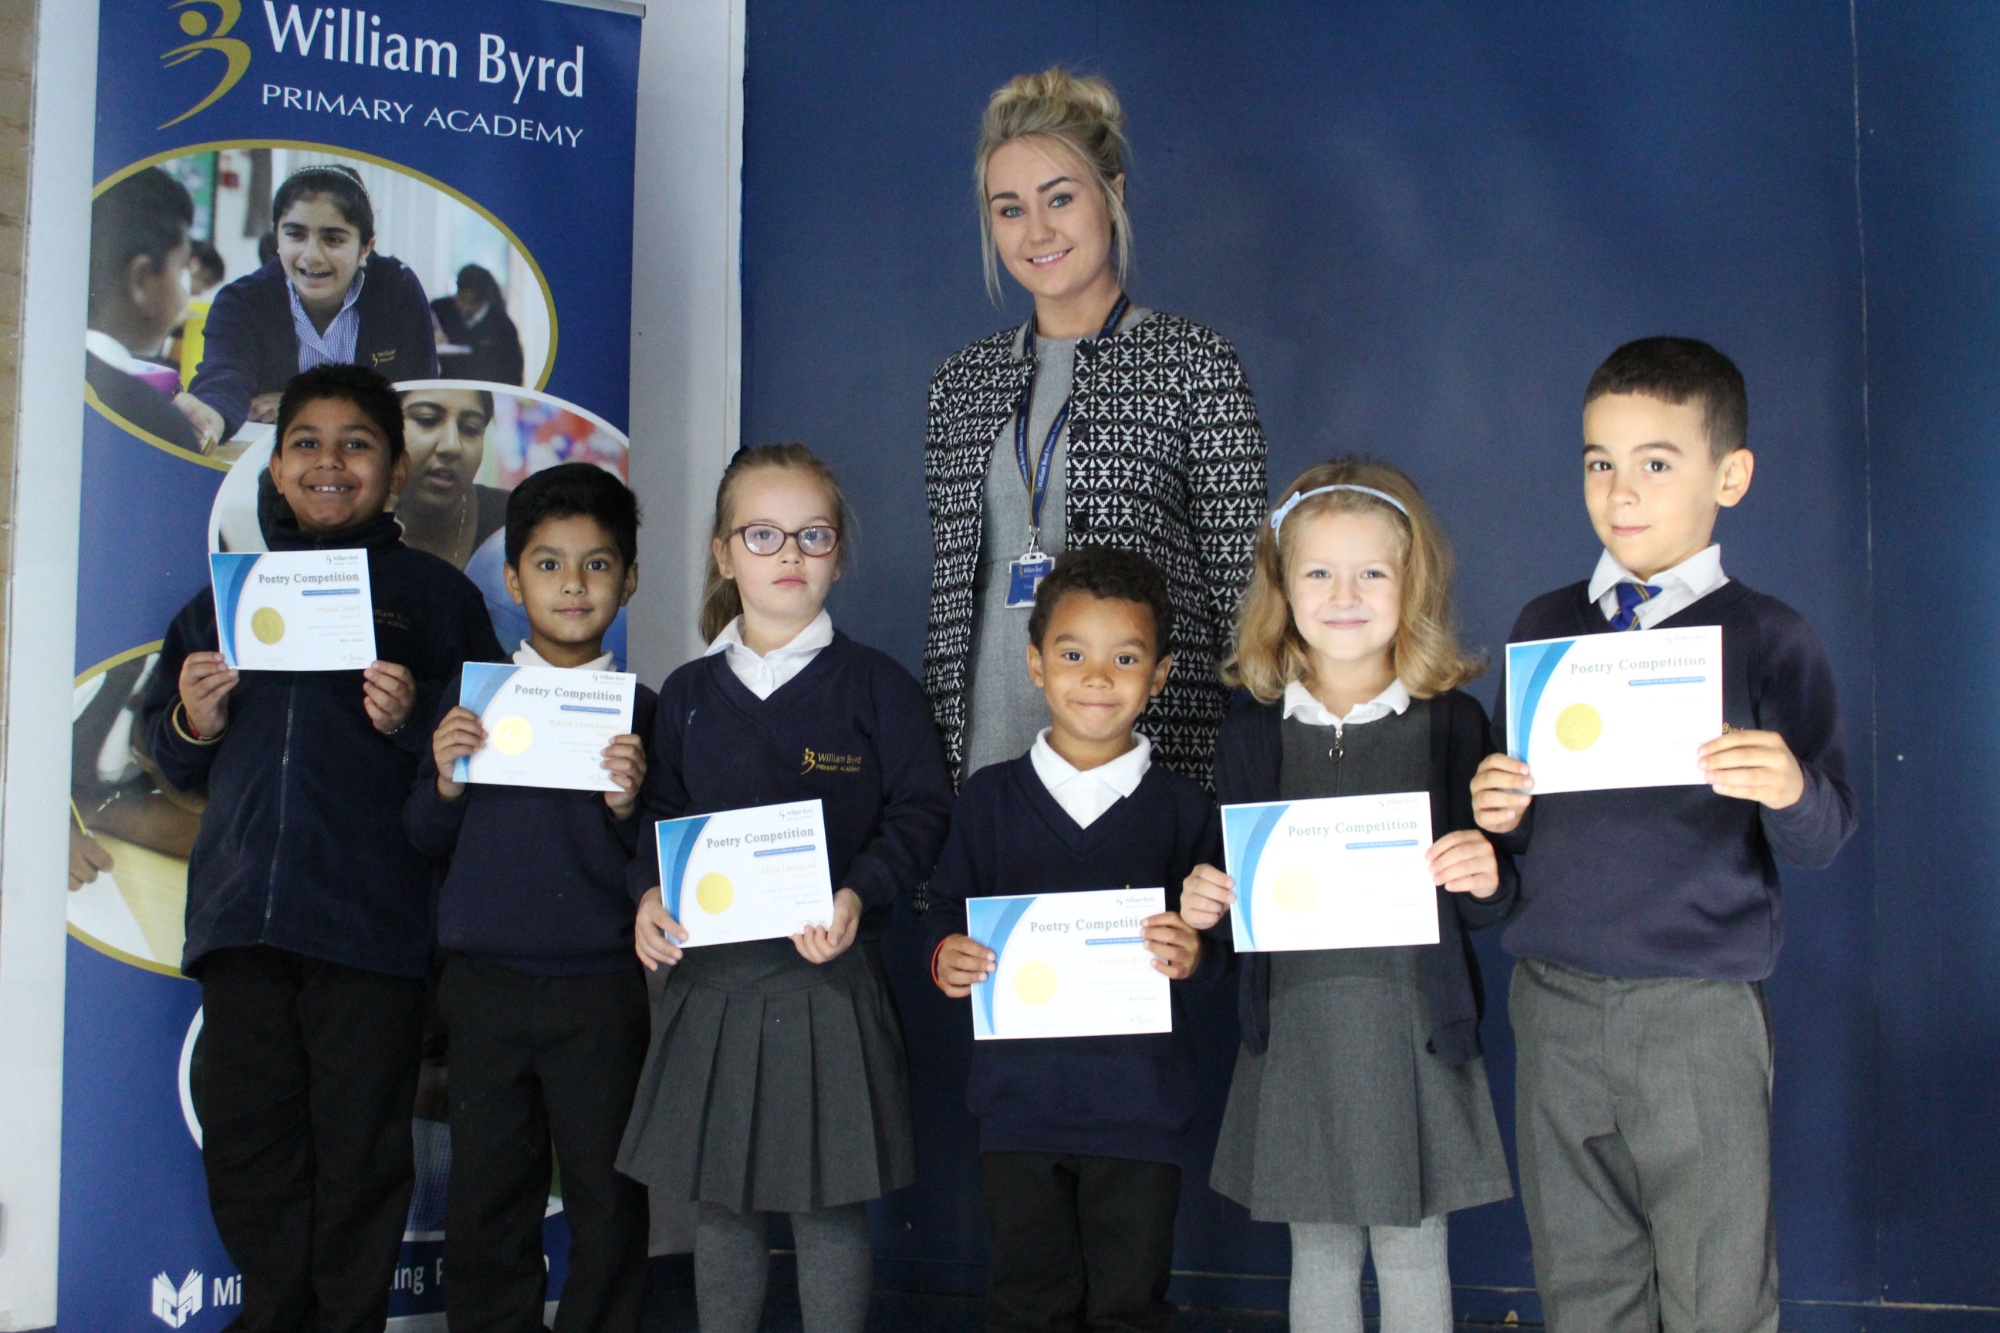 William Byrd Primary Academy - School Poetry Competition Winners